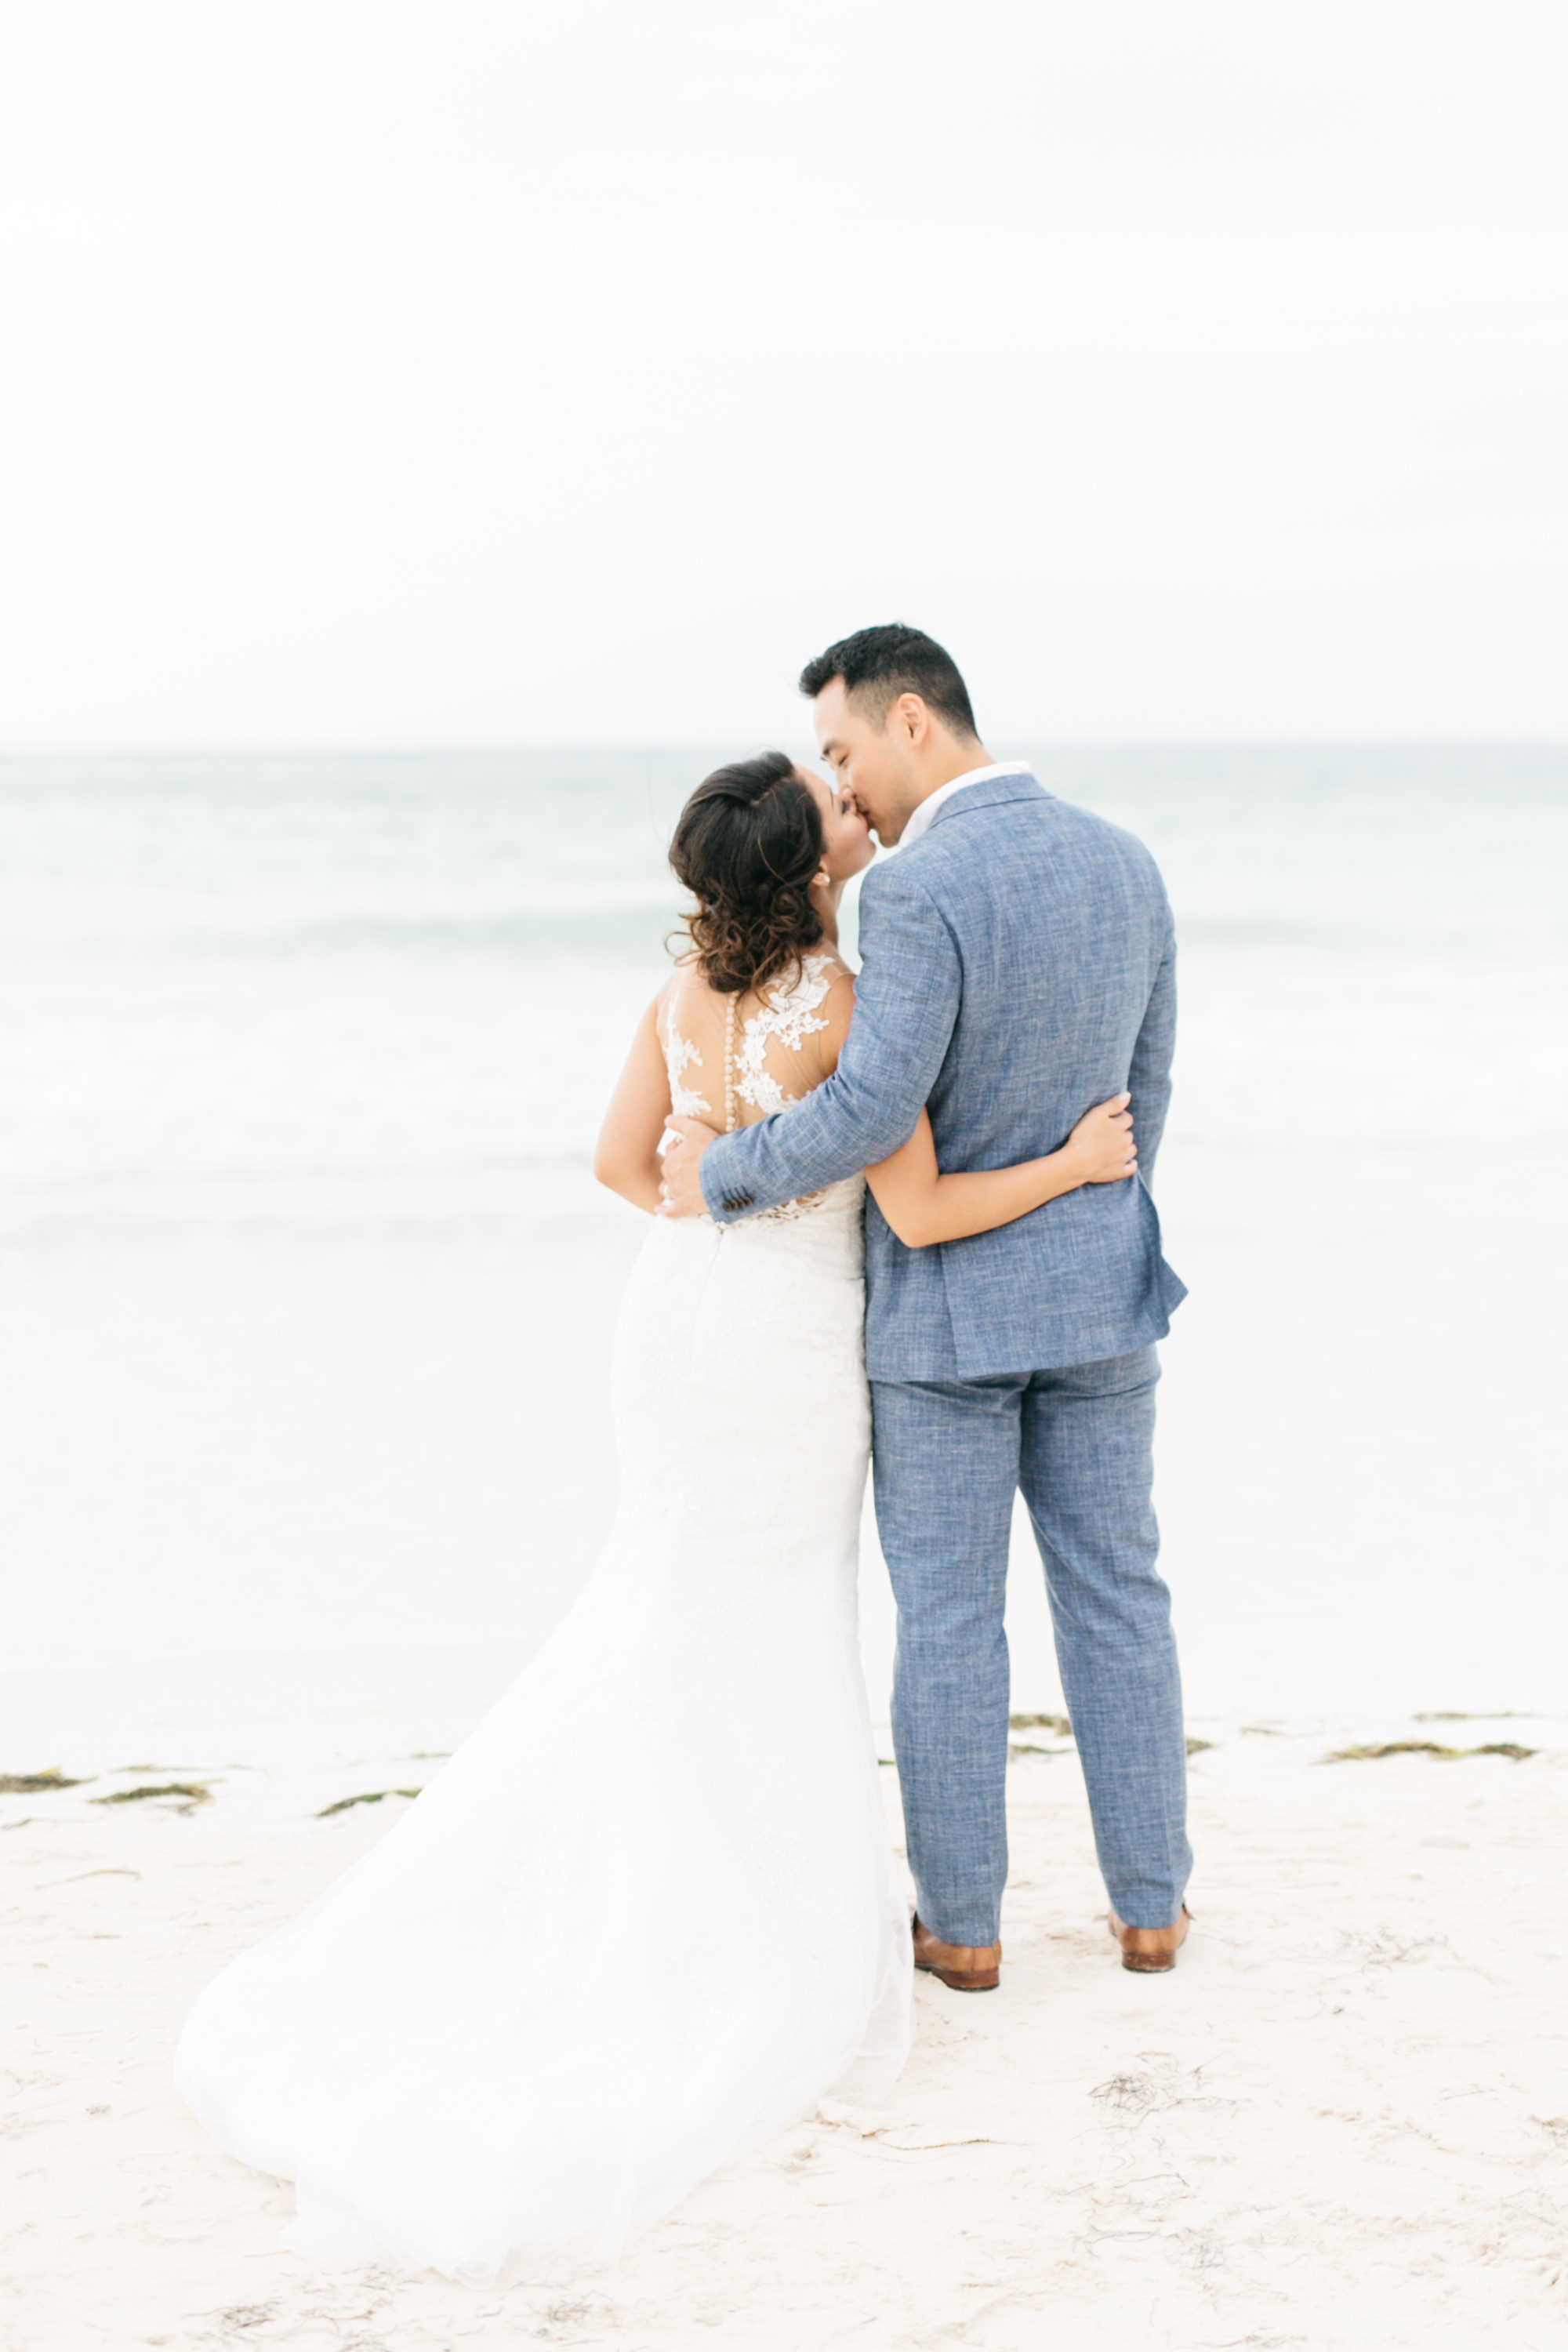 Bride and groom on beach in Jamaica